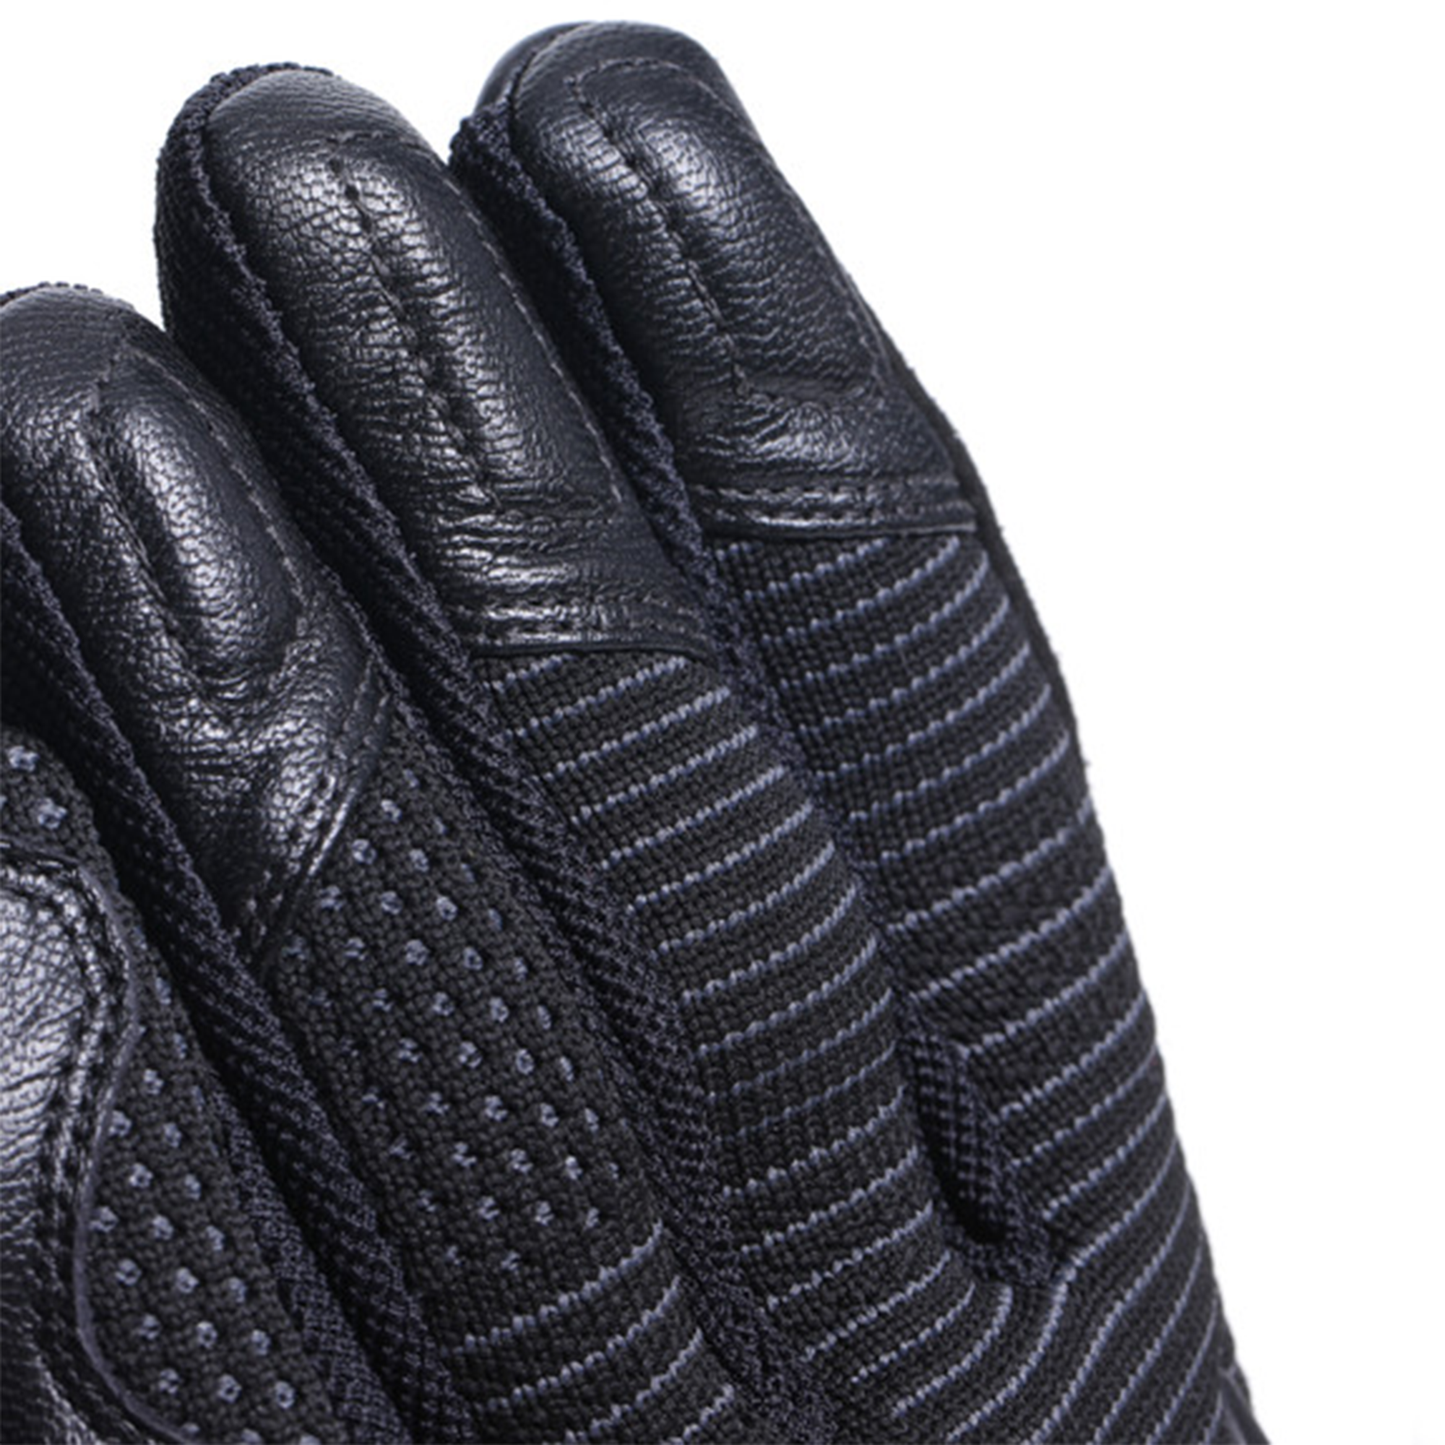 Dainese Unruly Ergo-Tec Gloves - Black/Anthracite (604)